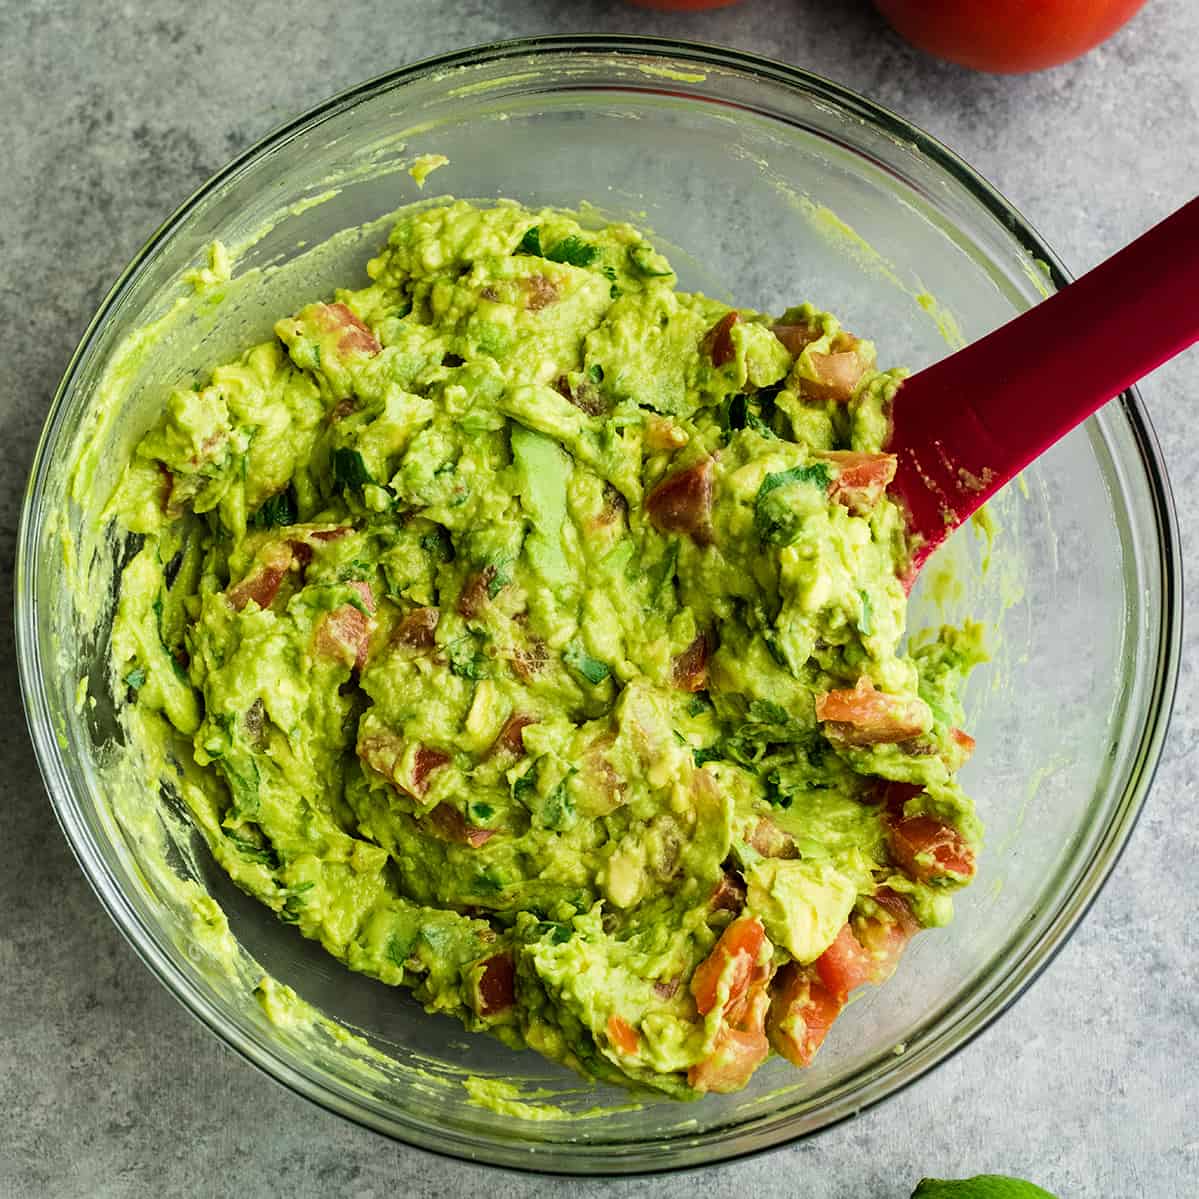 photo showing guacamole mixed in a bowl with a spatula